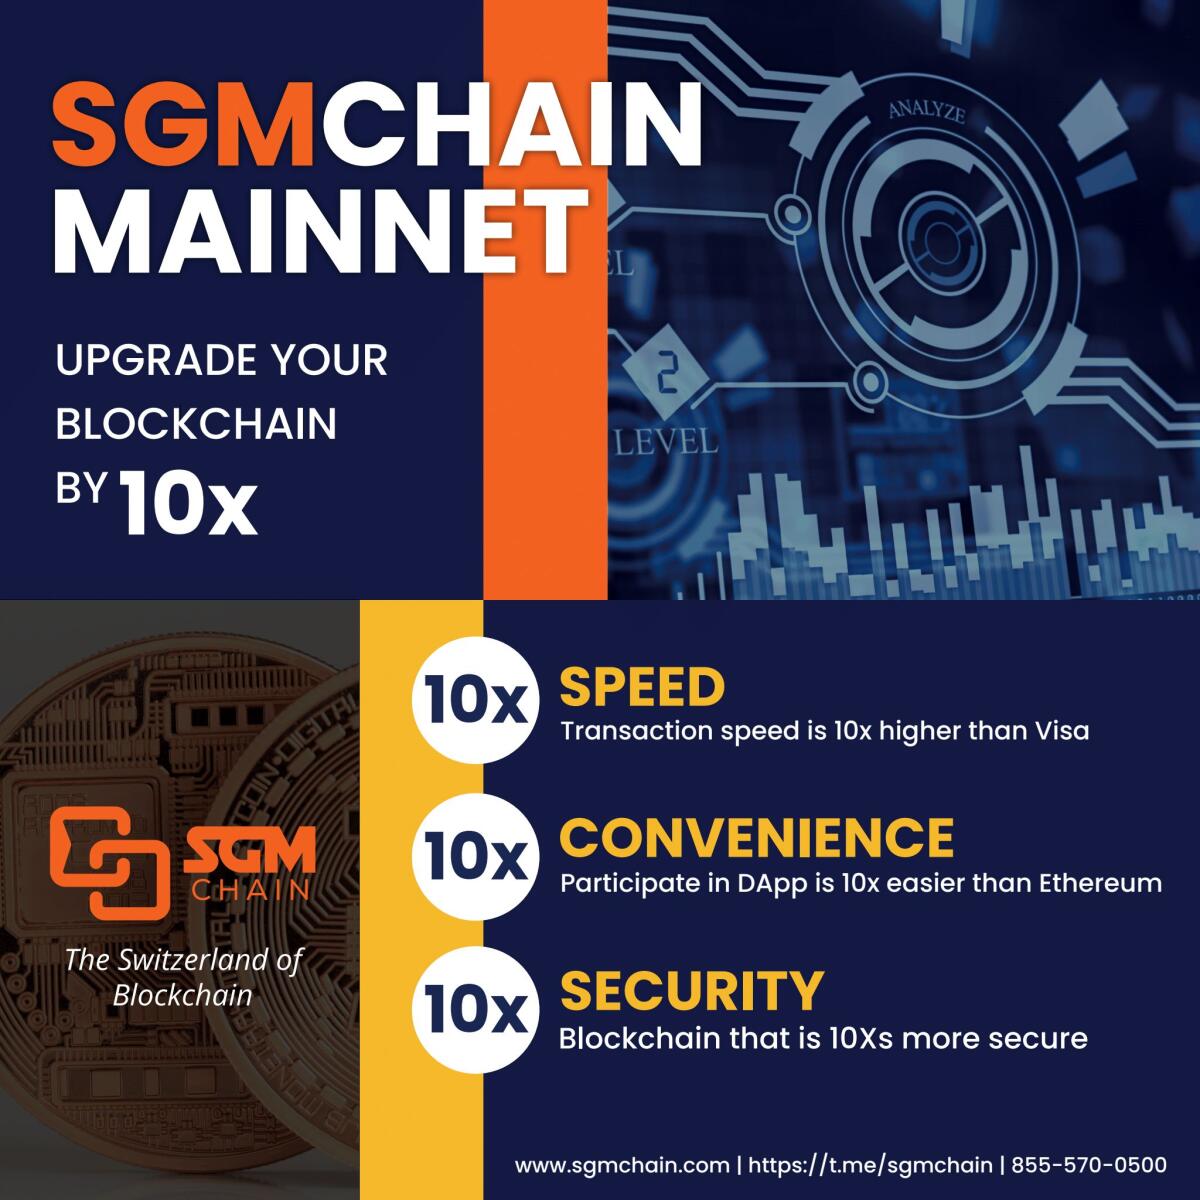 From SGM Chain